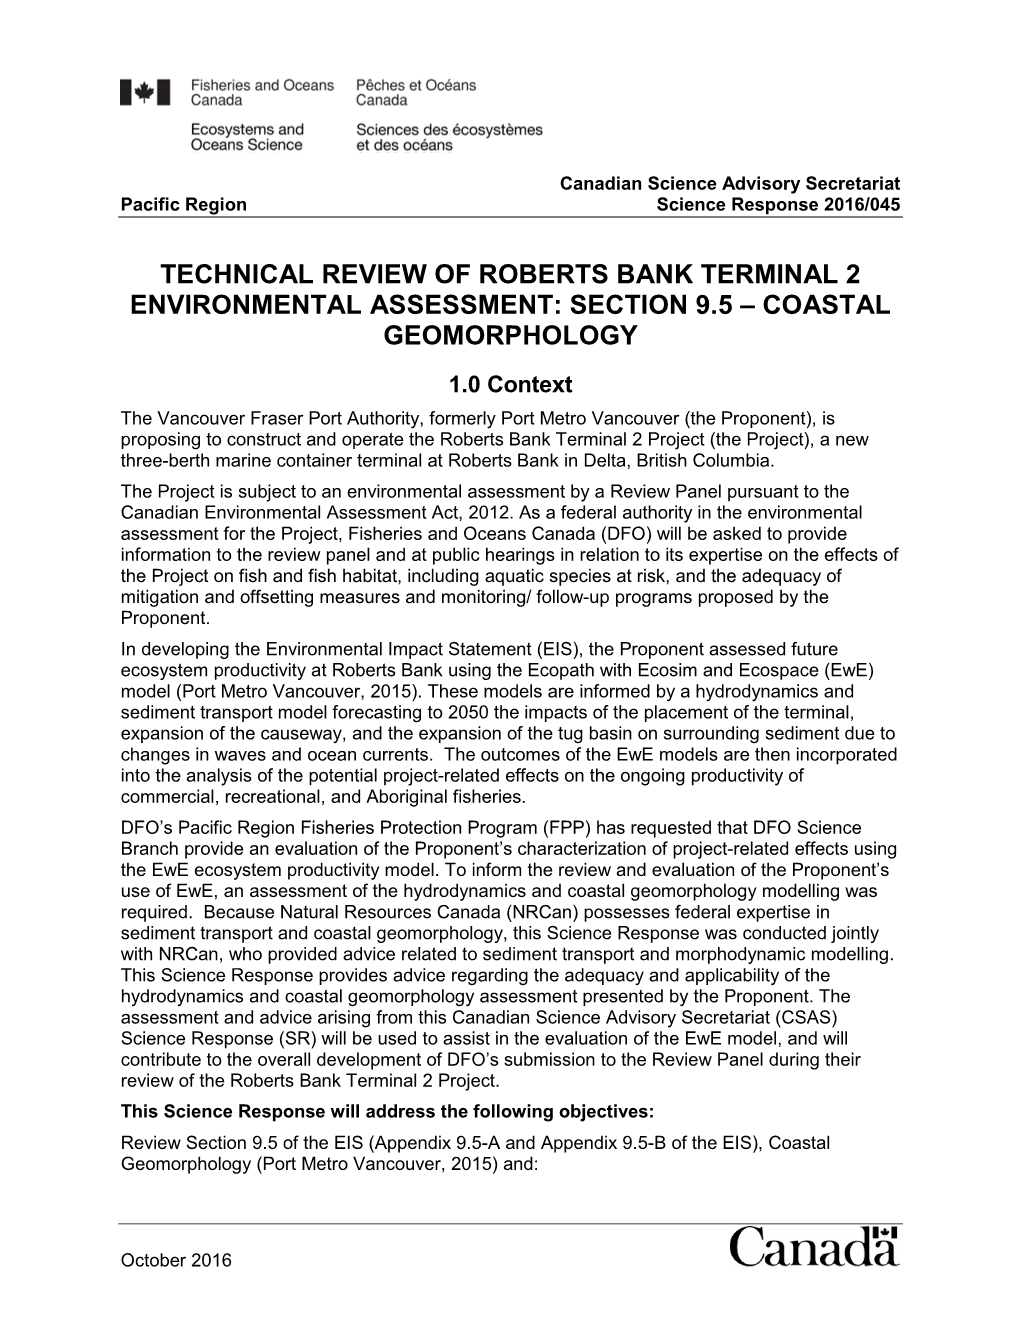 Technical Review of Roberts Bank